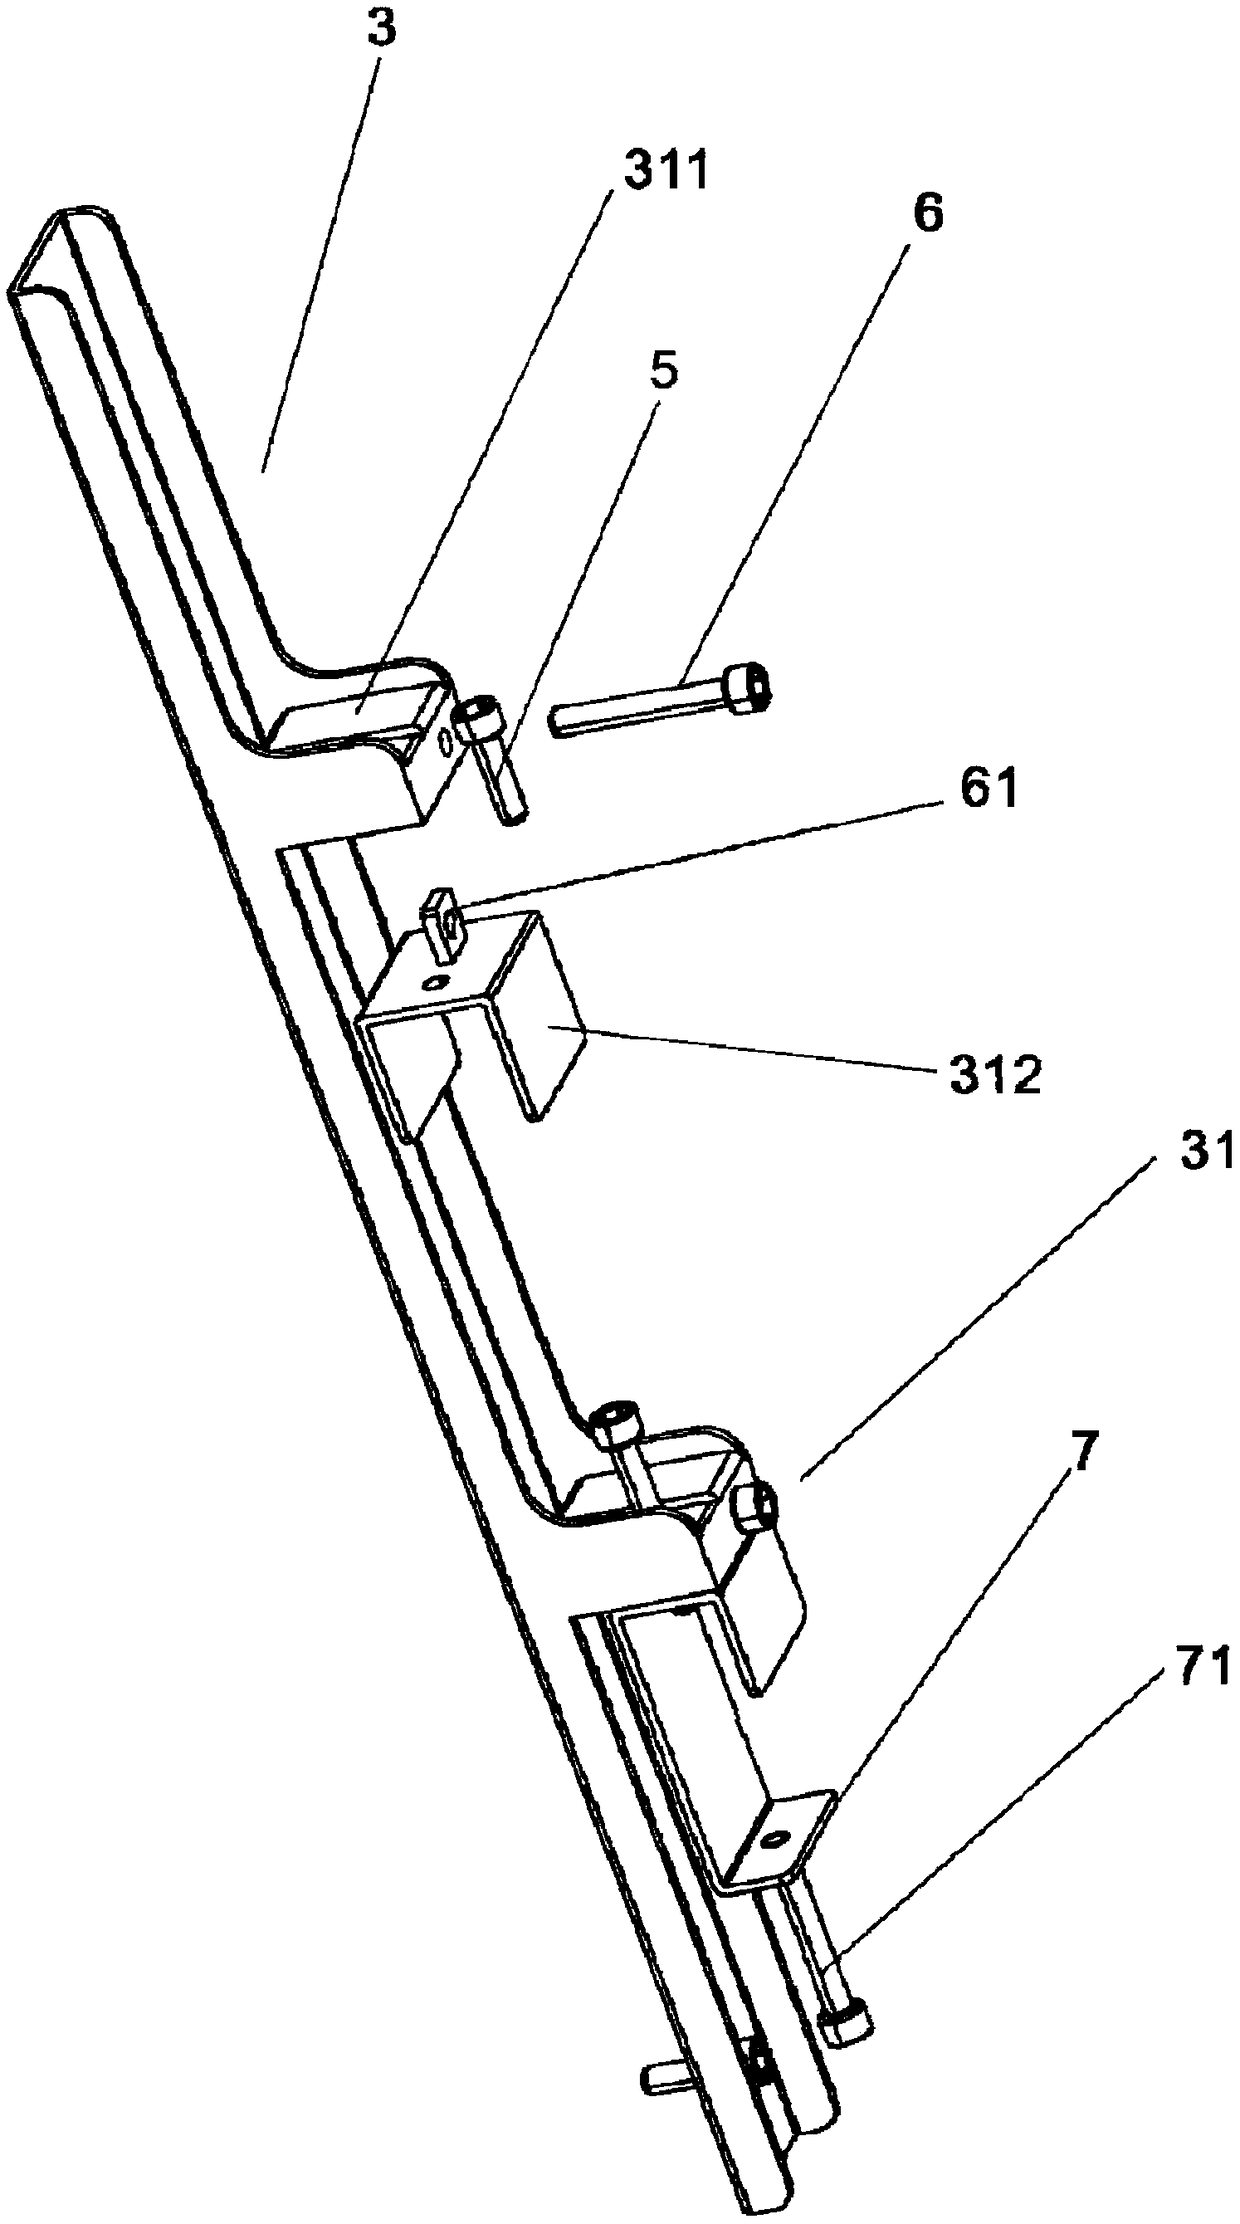 Joint screen supporting structure